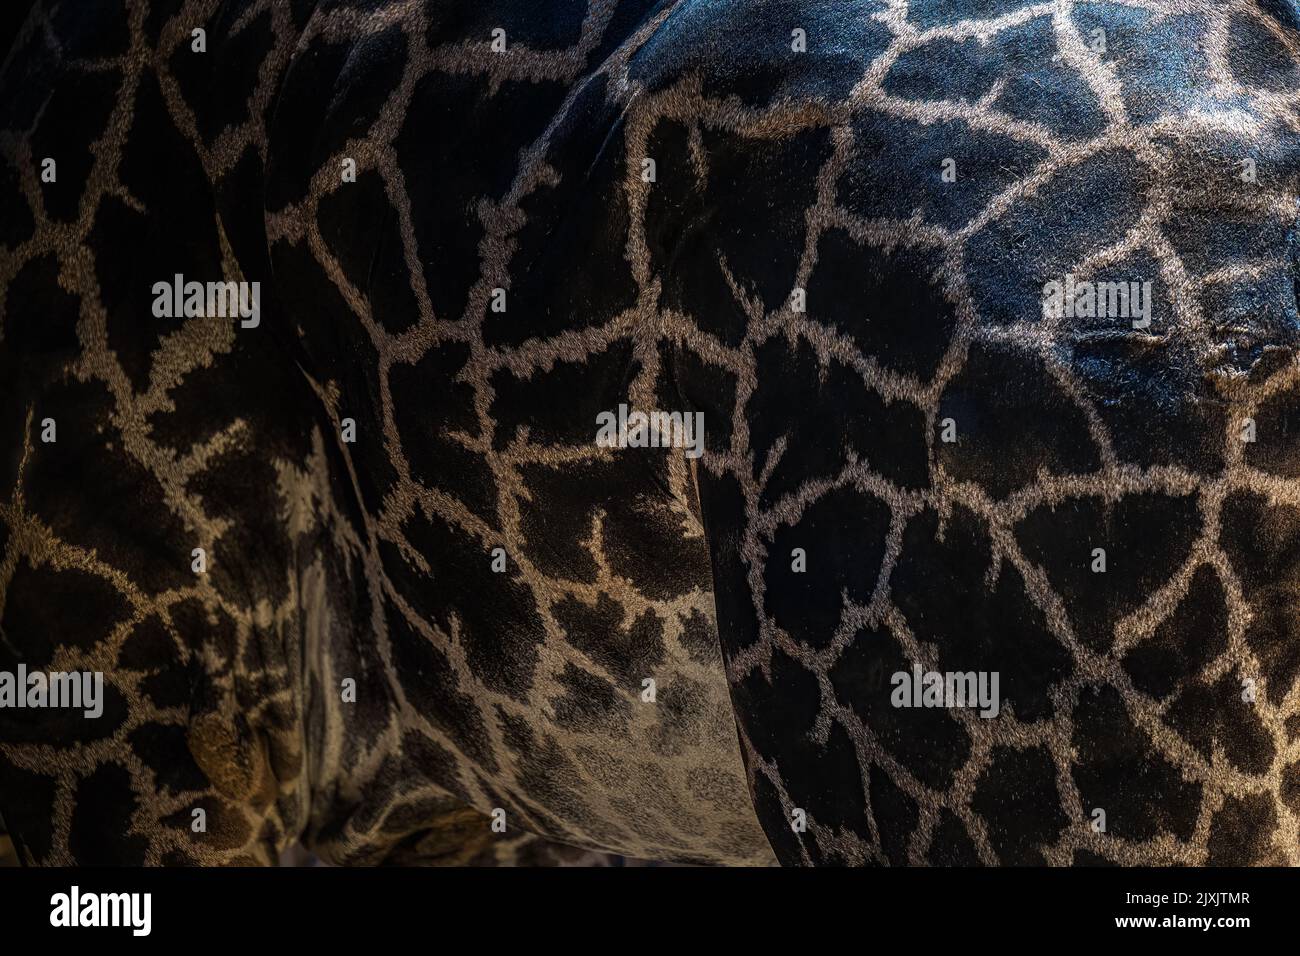 A CLOSE UP OF THE PATTERNED HIDE OF A LARGE GIRAFFE Stock Photo